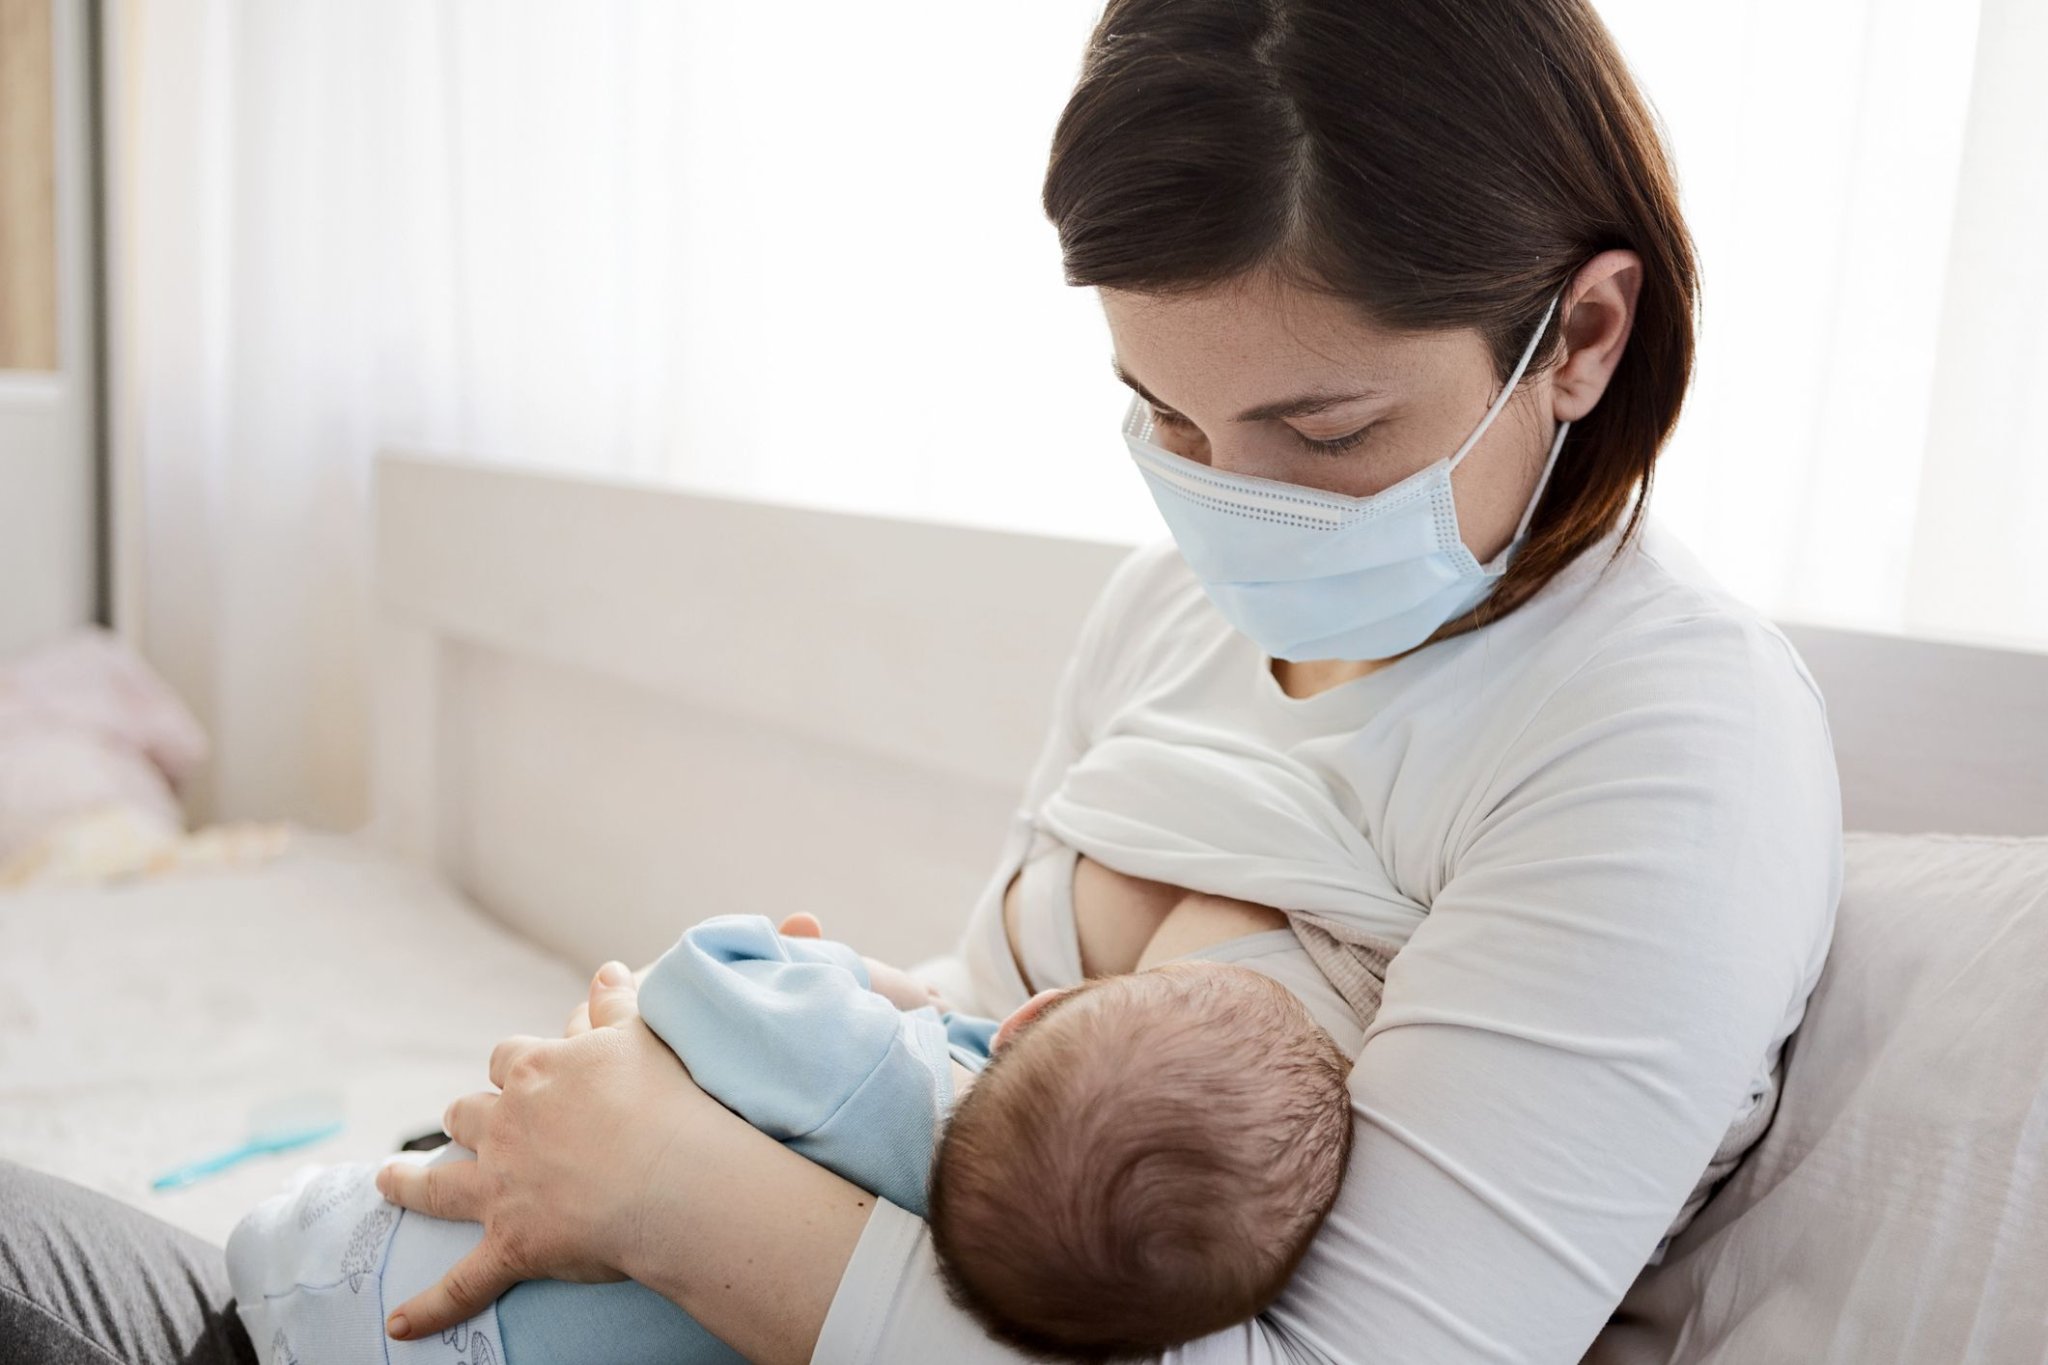 CDC Report Shows 1 in 5 Hospitals Cut Breastfeeding Support During Pandemic